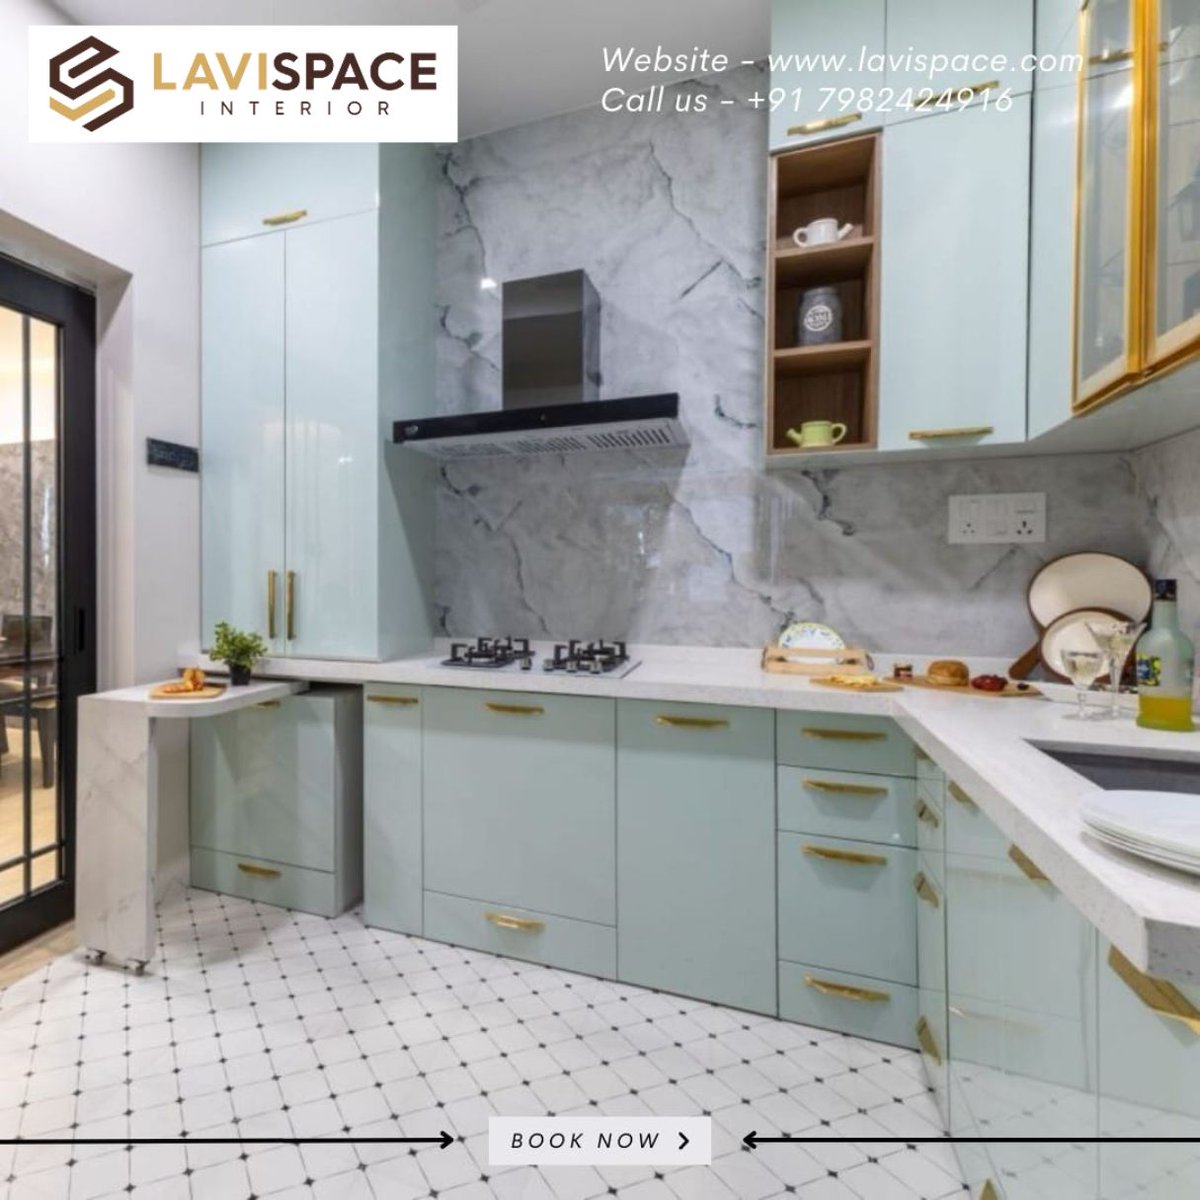 Cook in Style😊Modular Kitchen Designs

Design Your Home With Lavispace
#kitchengoals #modularkitchen #kitchendesign #kitcheninspiration #kitchenremodel #kitchenrenovation #kitchenmakeover #homedecor #interiordesign #homerenovation #dreamkitchen #modernkitchen #contemporarydesign